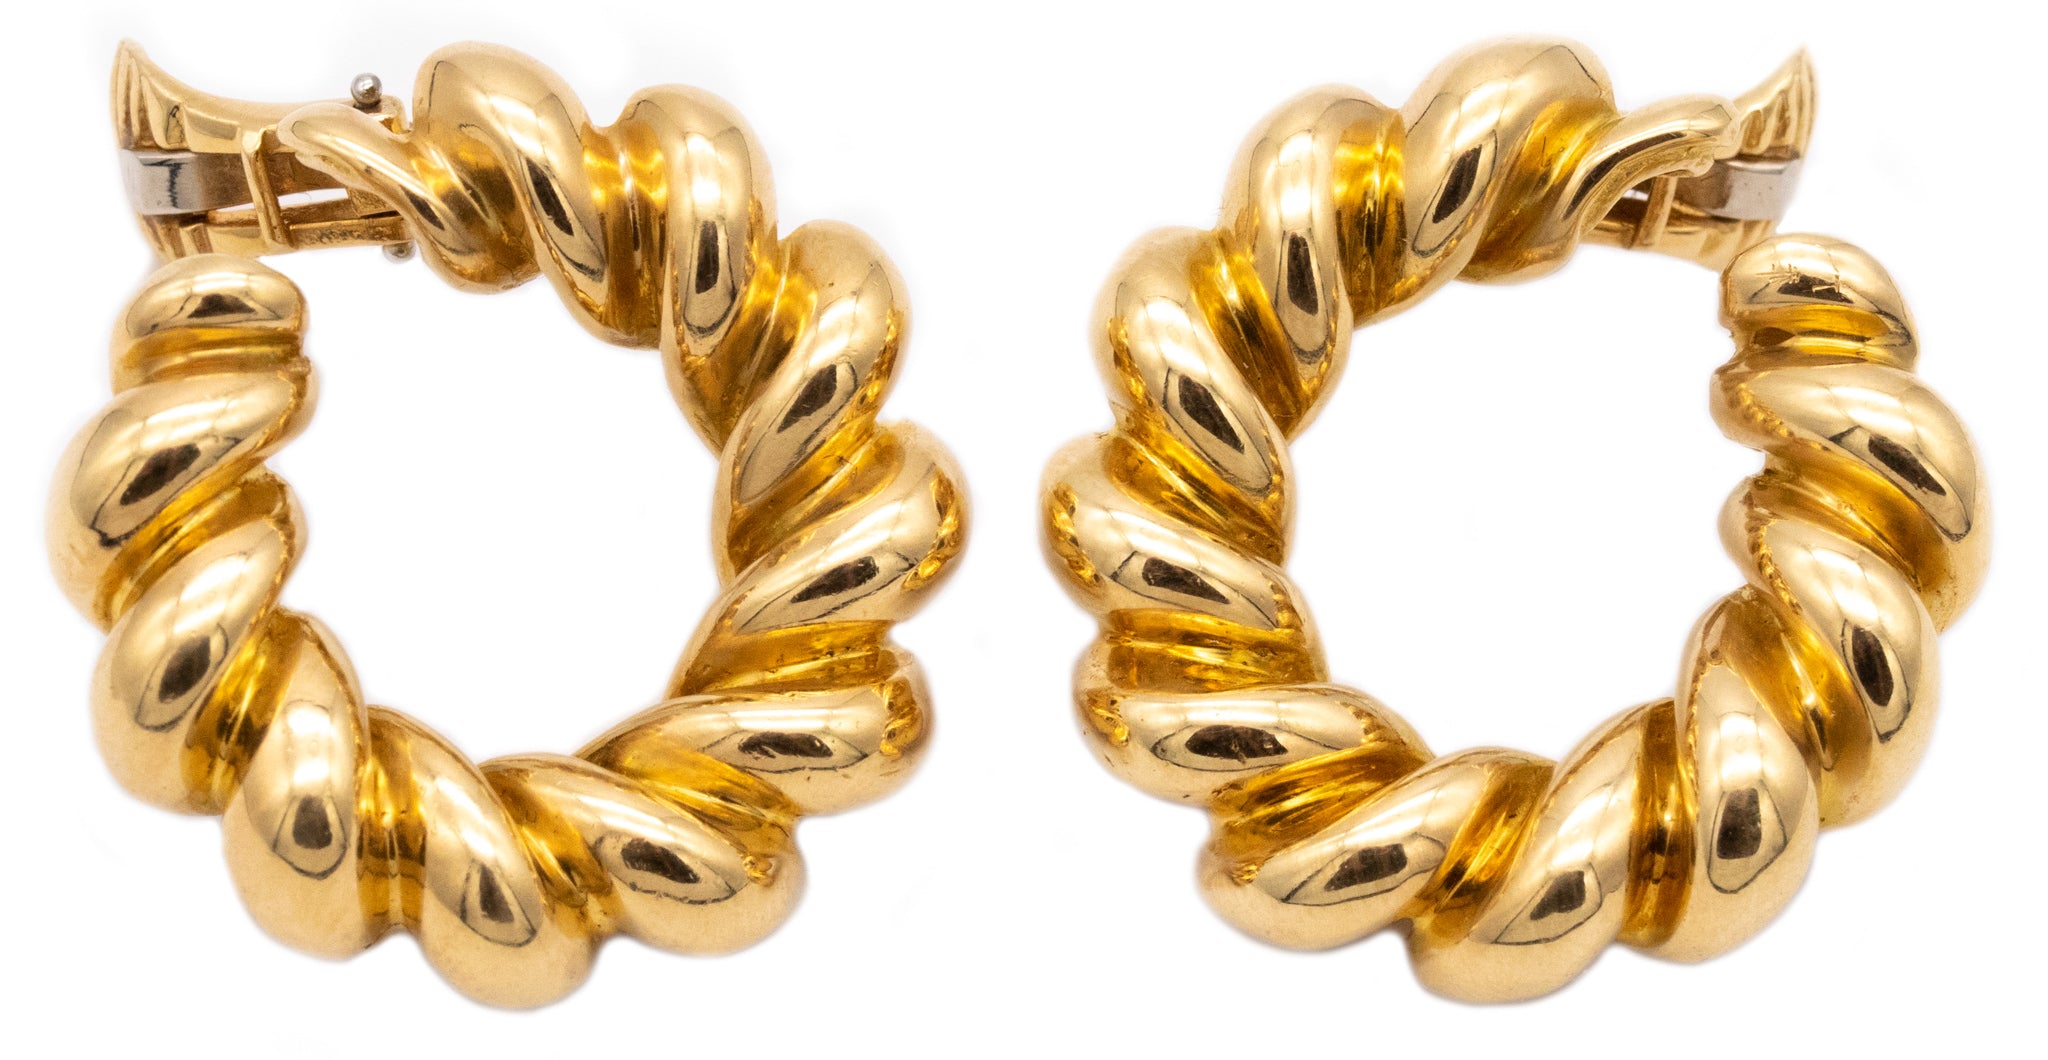 CARTIER 18 KT YELLOW GOLD TWISTED EARRINGS CLIPS